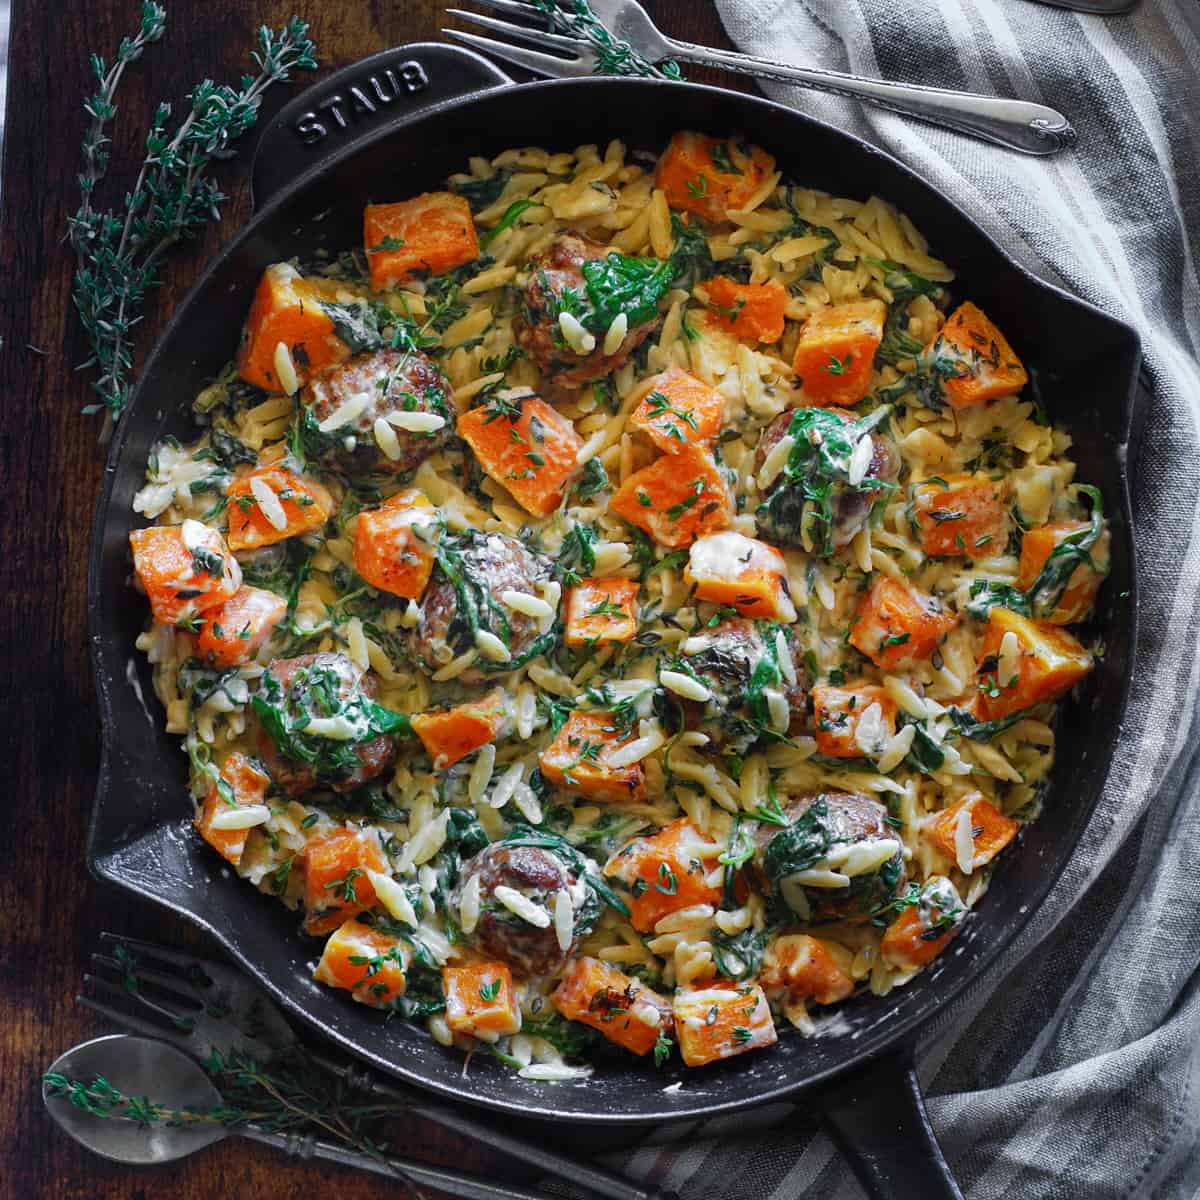 Baked Chicken Meatballs with Creamy Orzo, Roasted Cubed Butternut Squash, and Spinach - in a cast iron skillet.